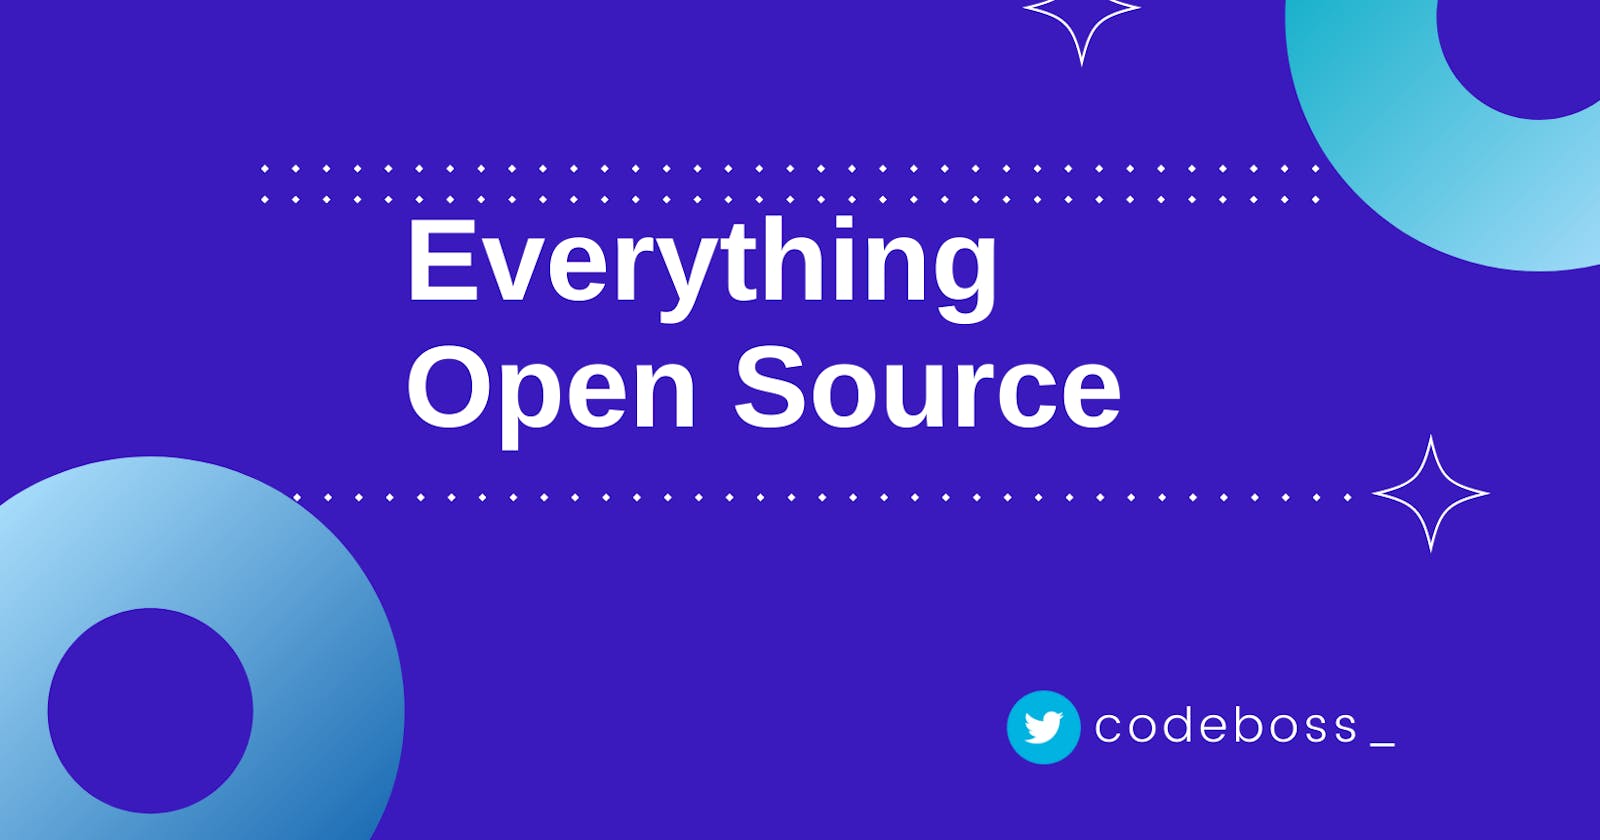 Everything Open Source!